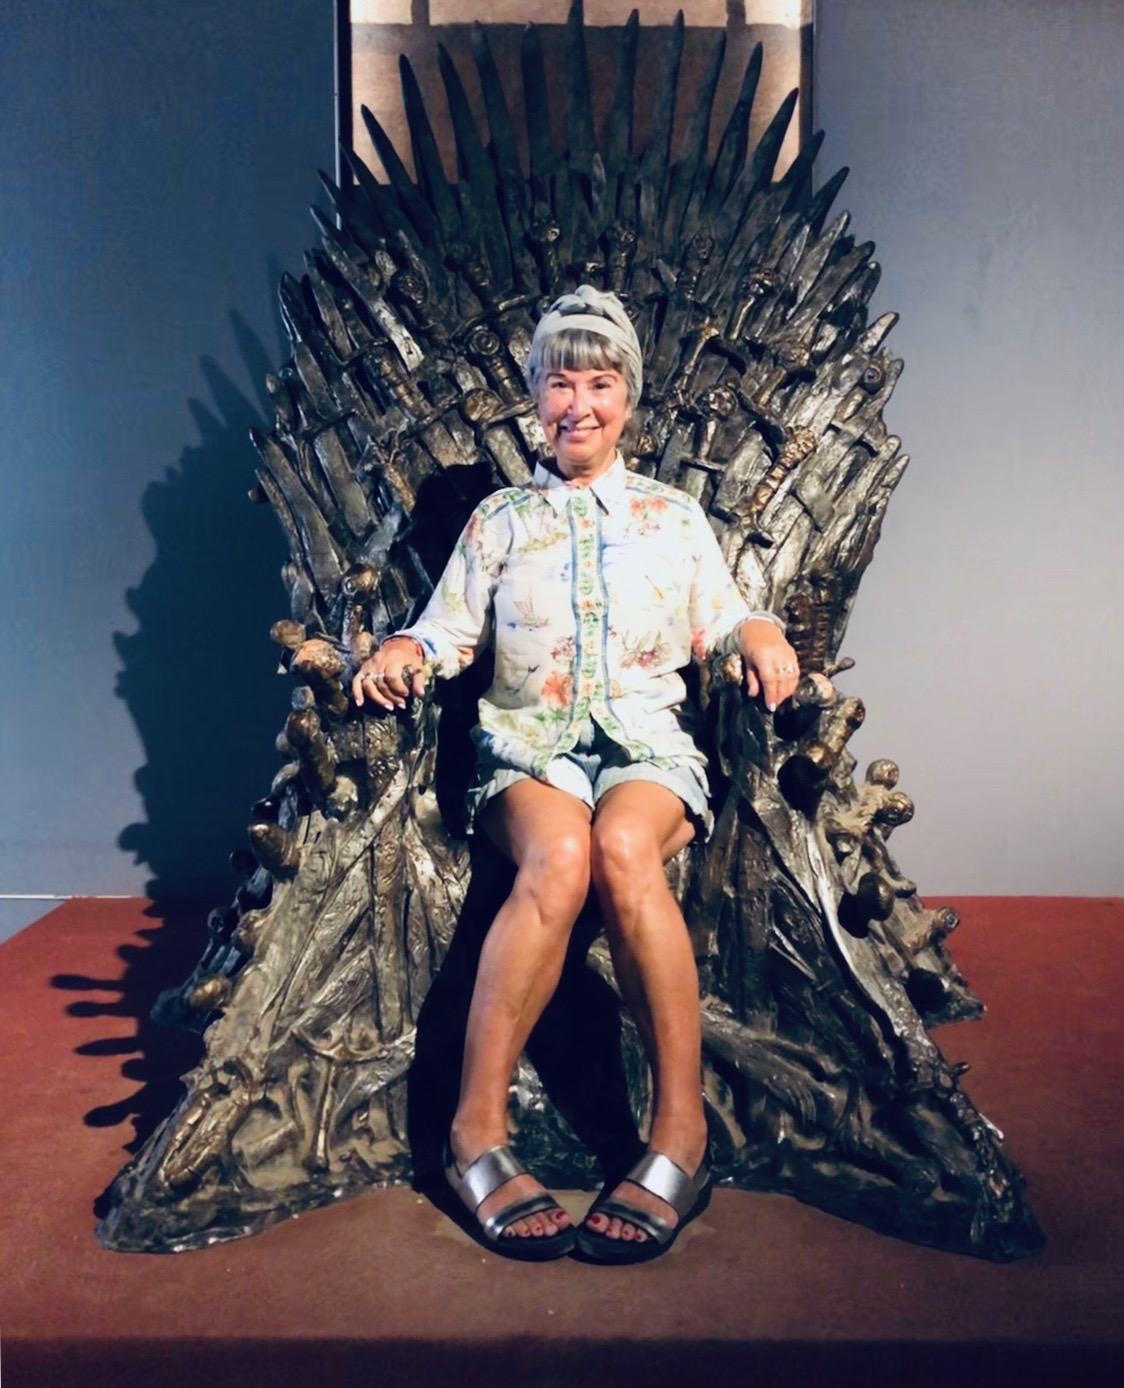 The Iron Throne, from Game of Thrones!